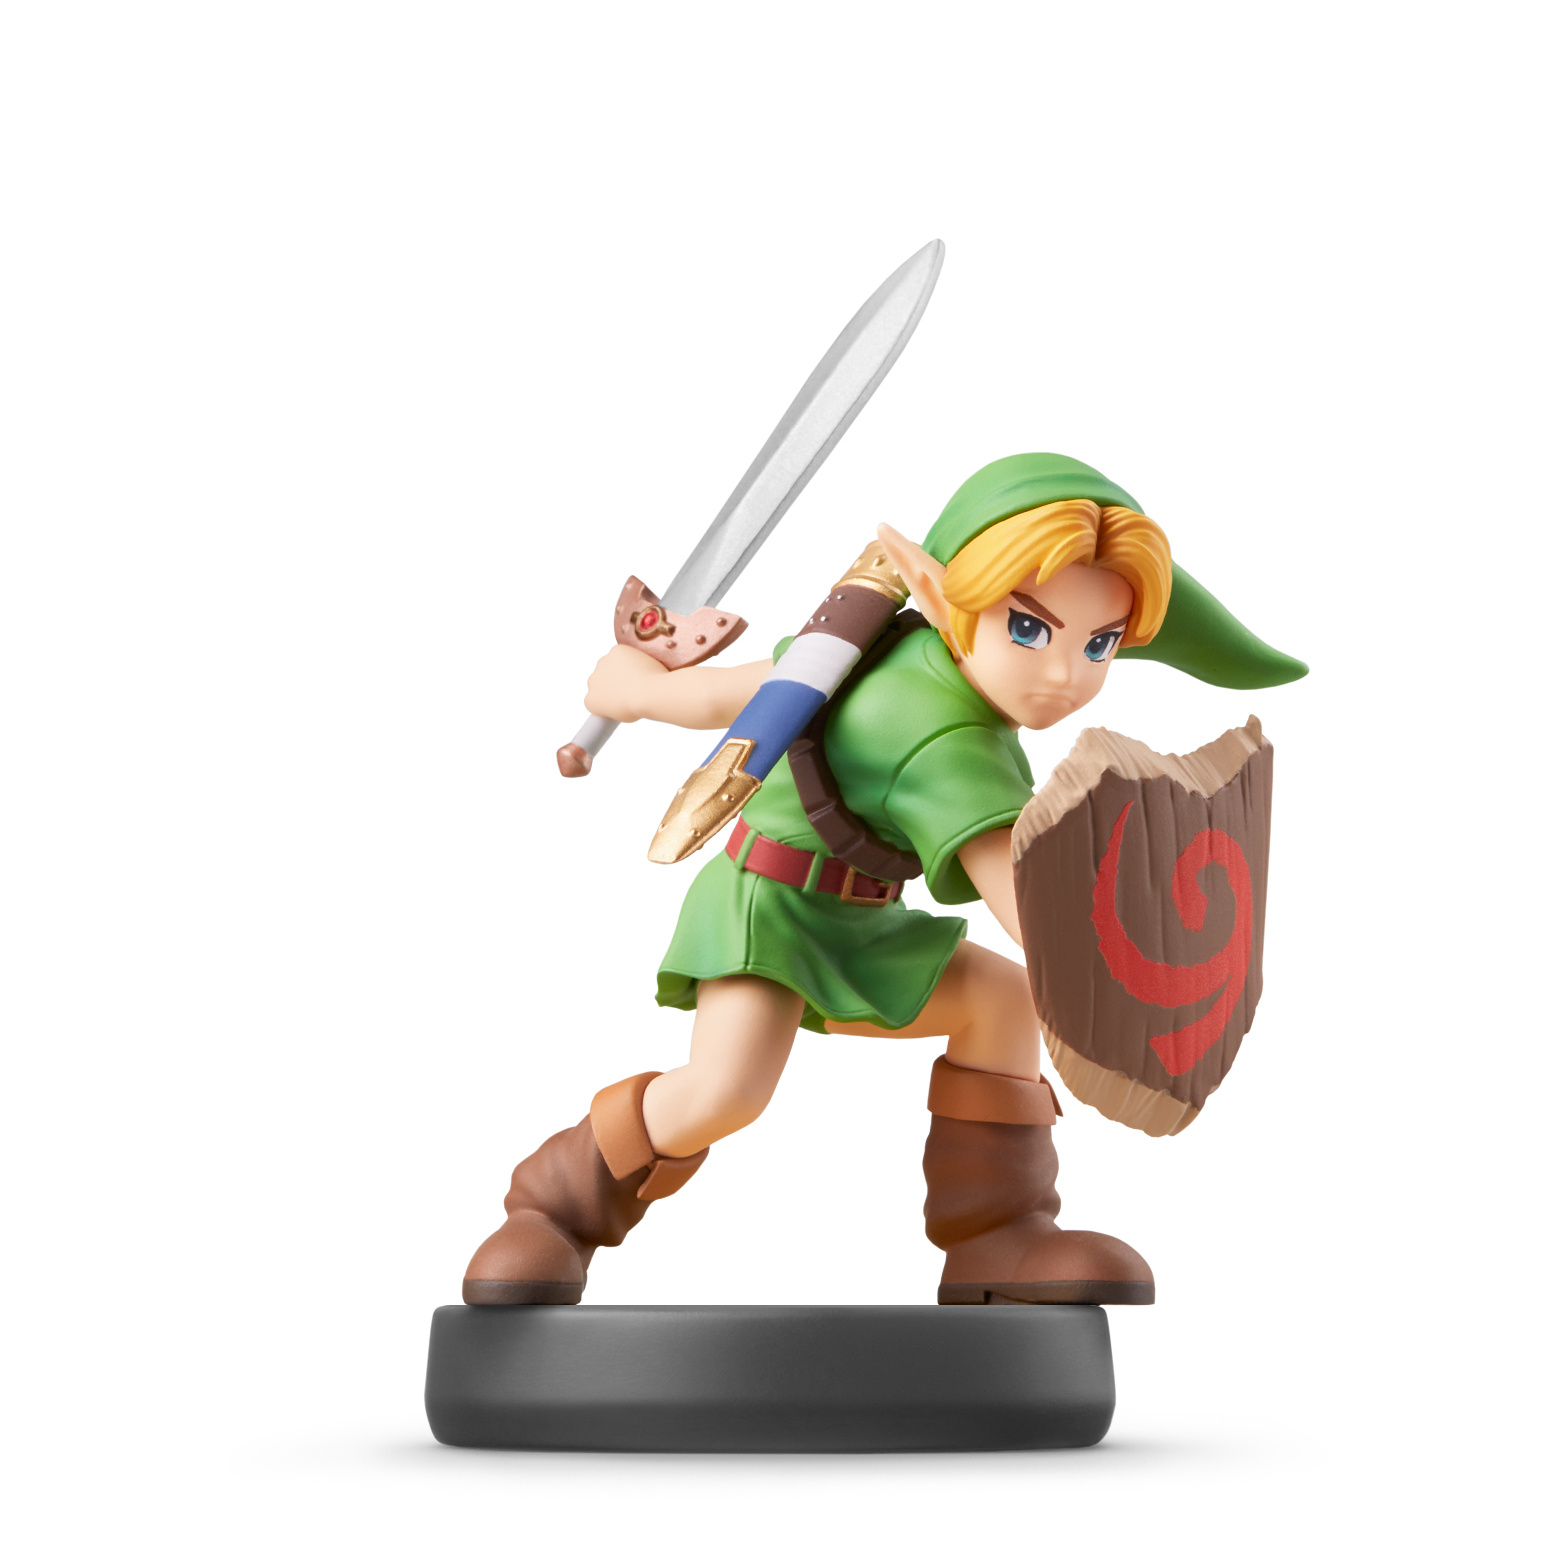 More Fighters Are Being Added To The Super Smash Bros. Ultimate amiibo